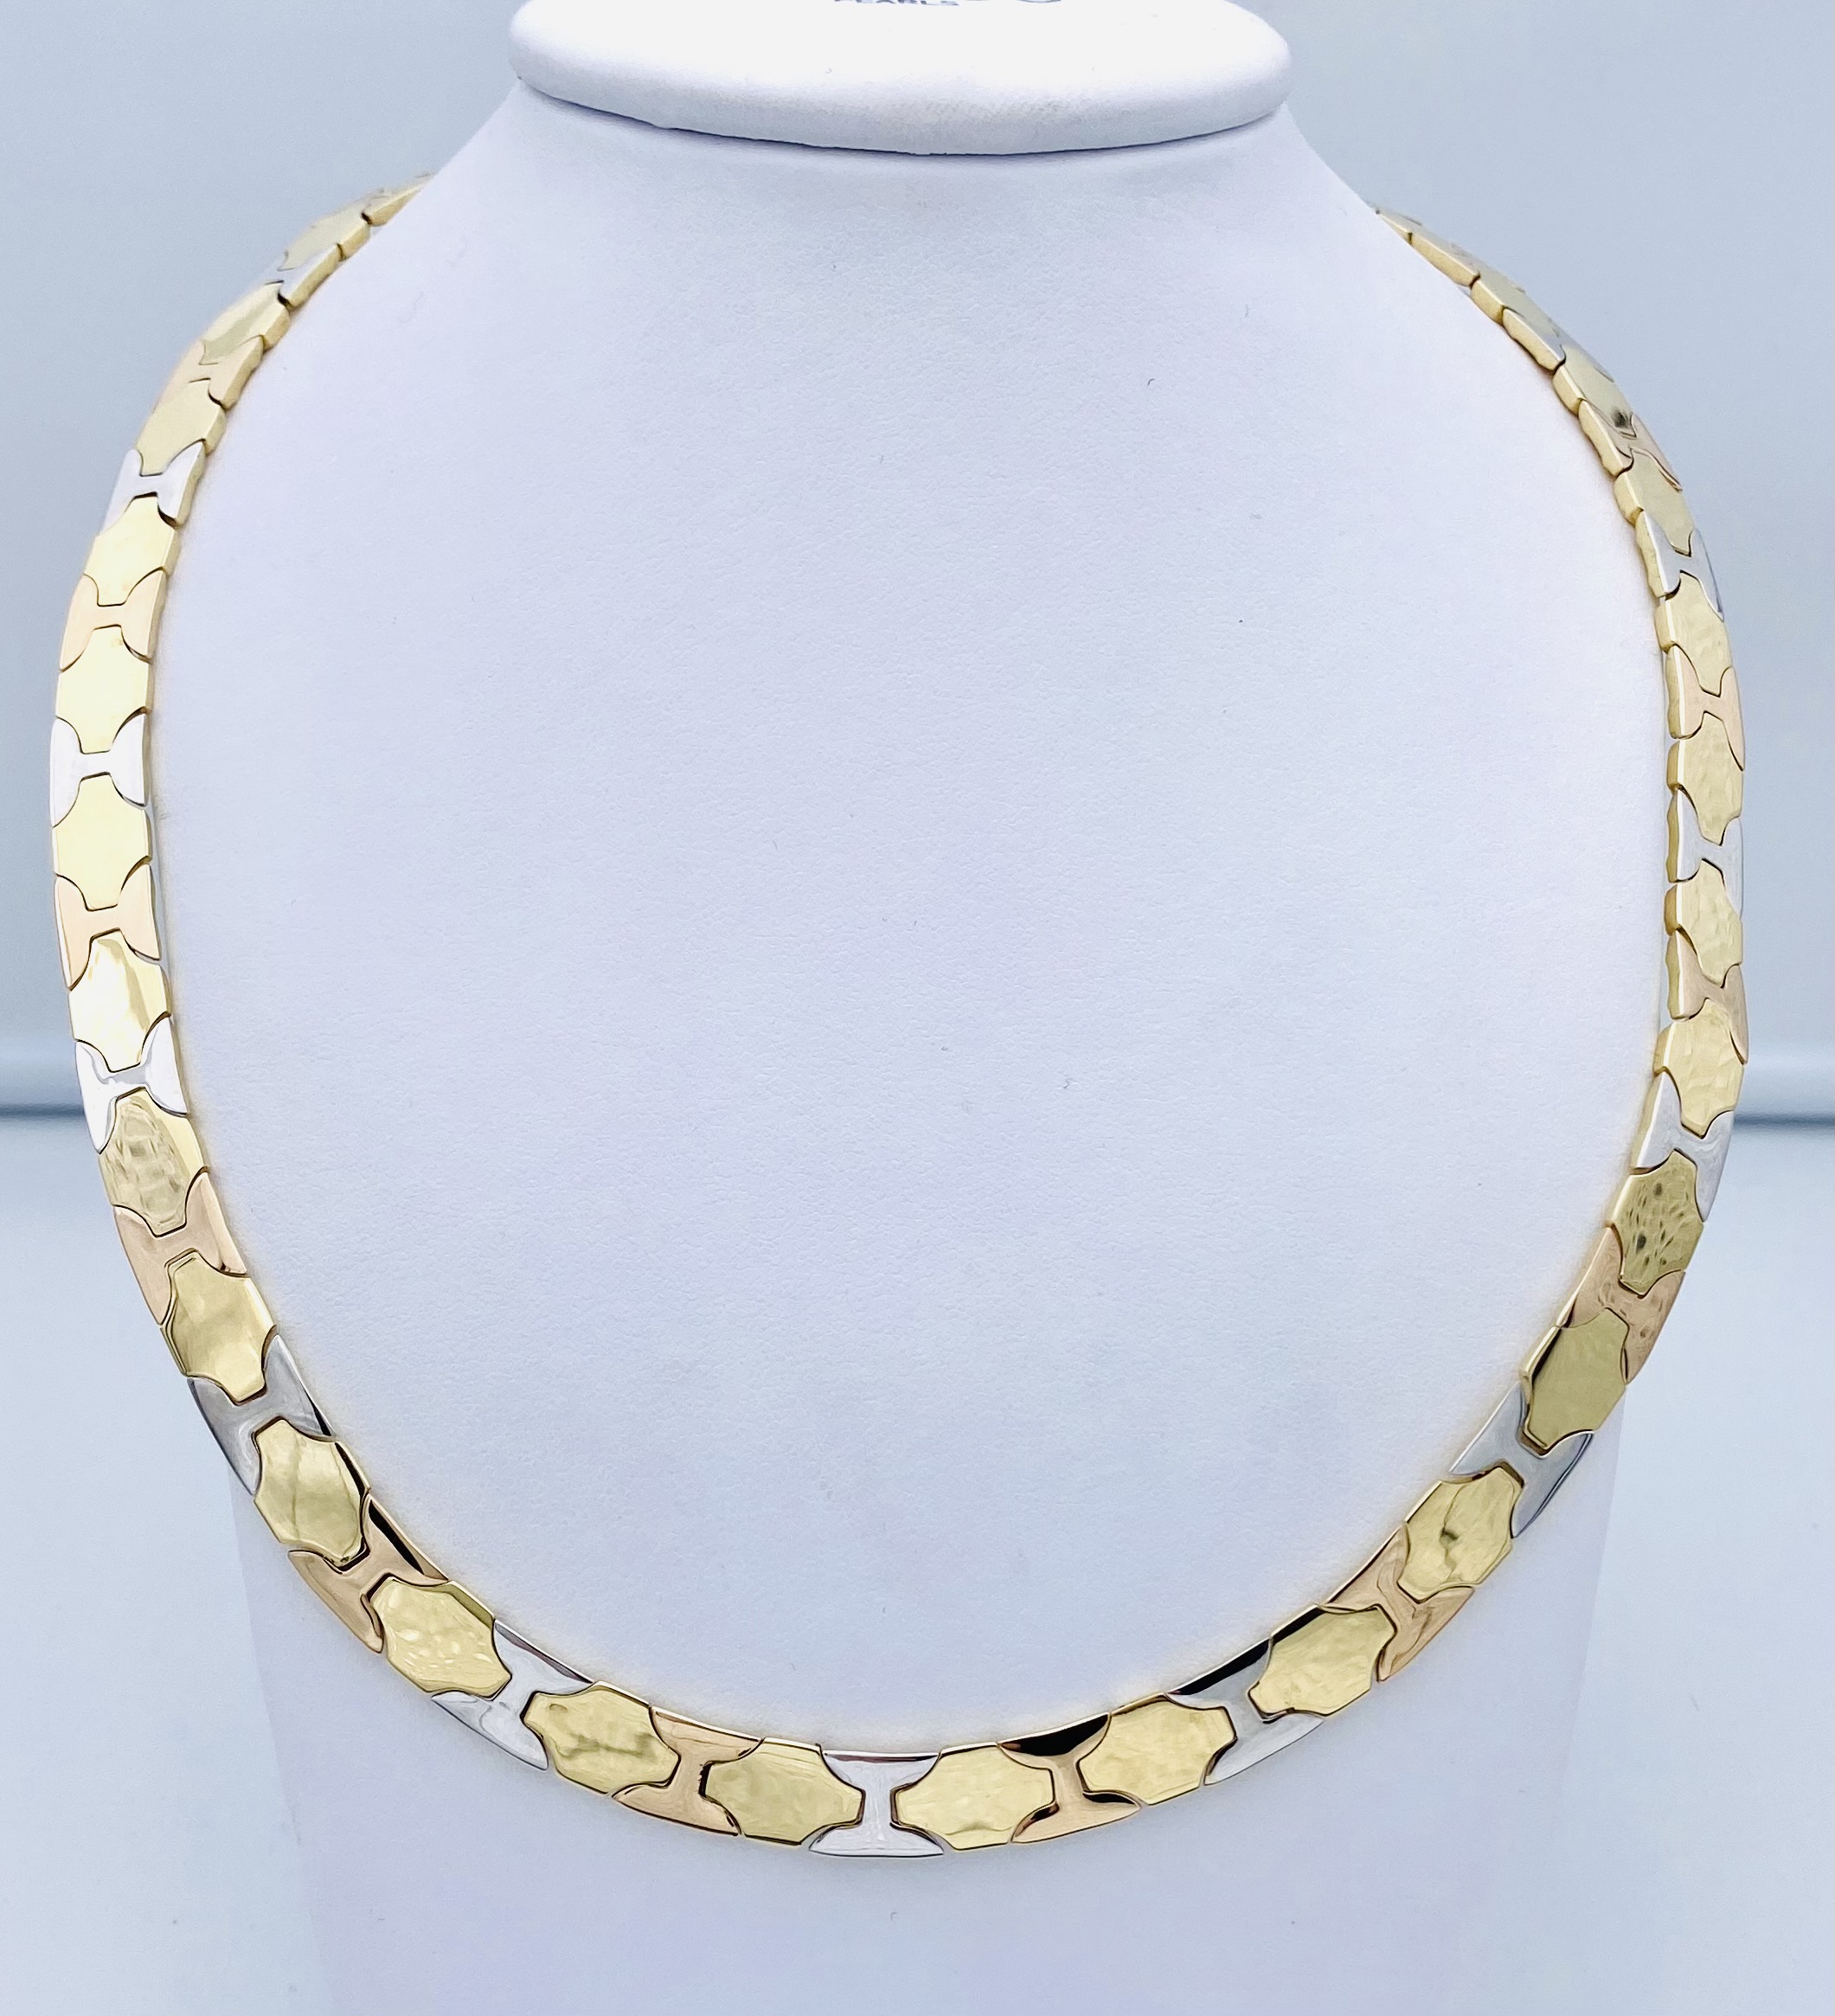 Men's round necklace yellow gold,white,pink 750% GR. 45,30 ART. CUOC01